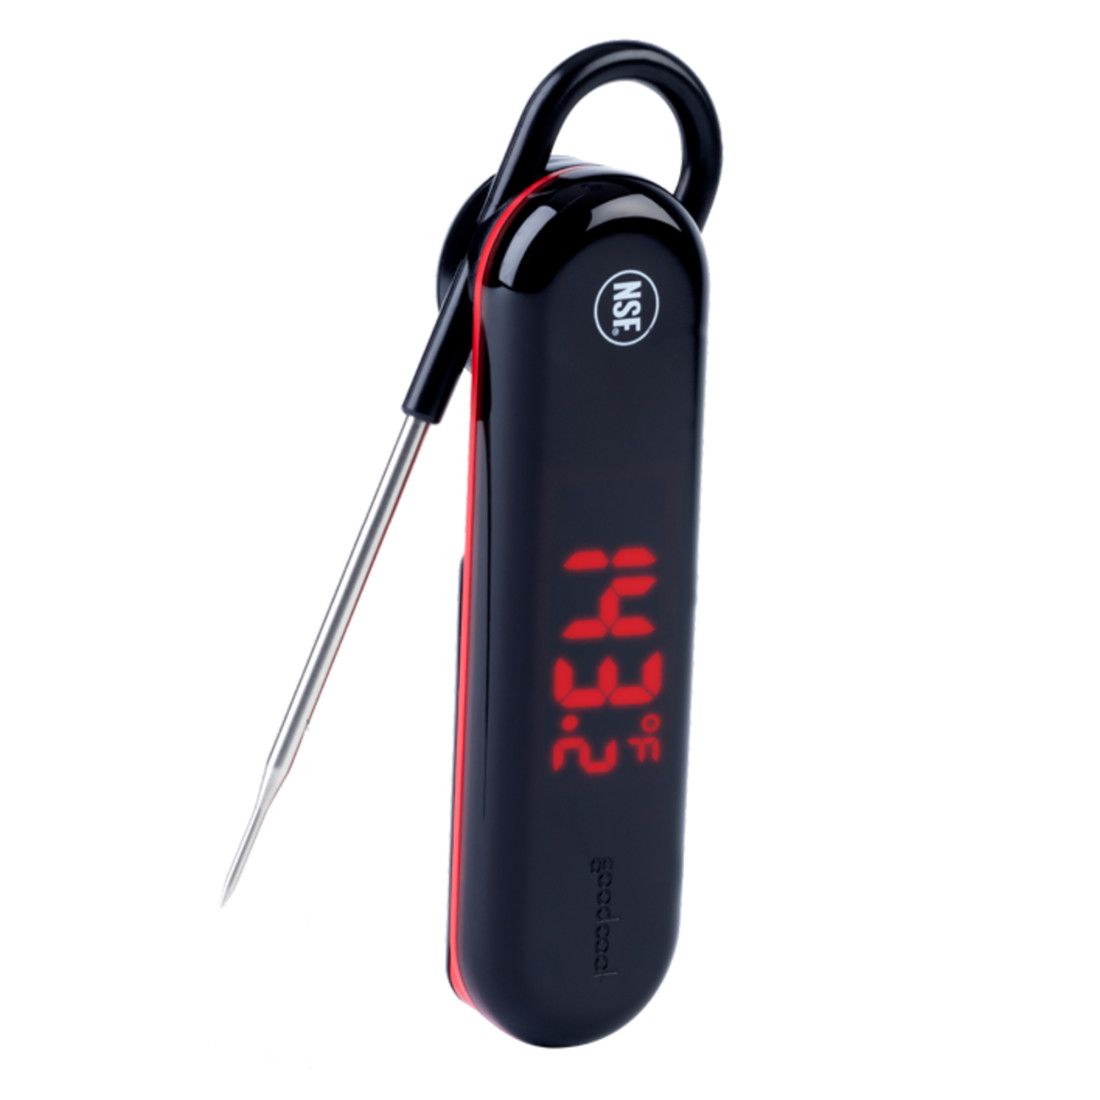 Convenient Cooking Helper Digital Meat Thermometer for Ground Beef